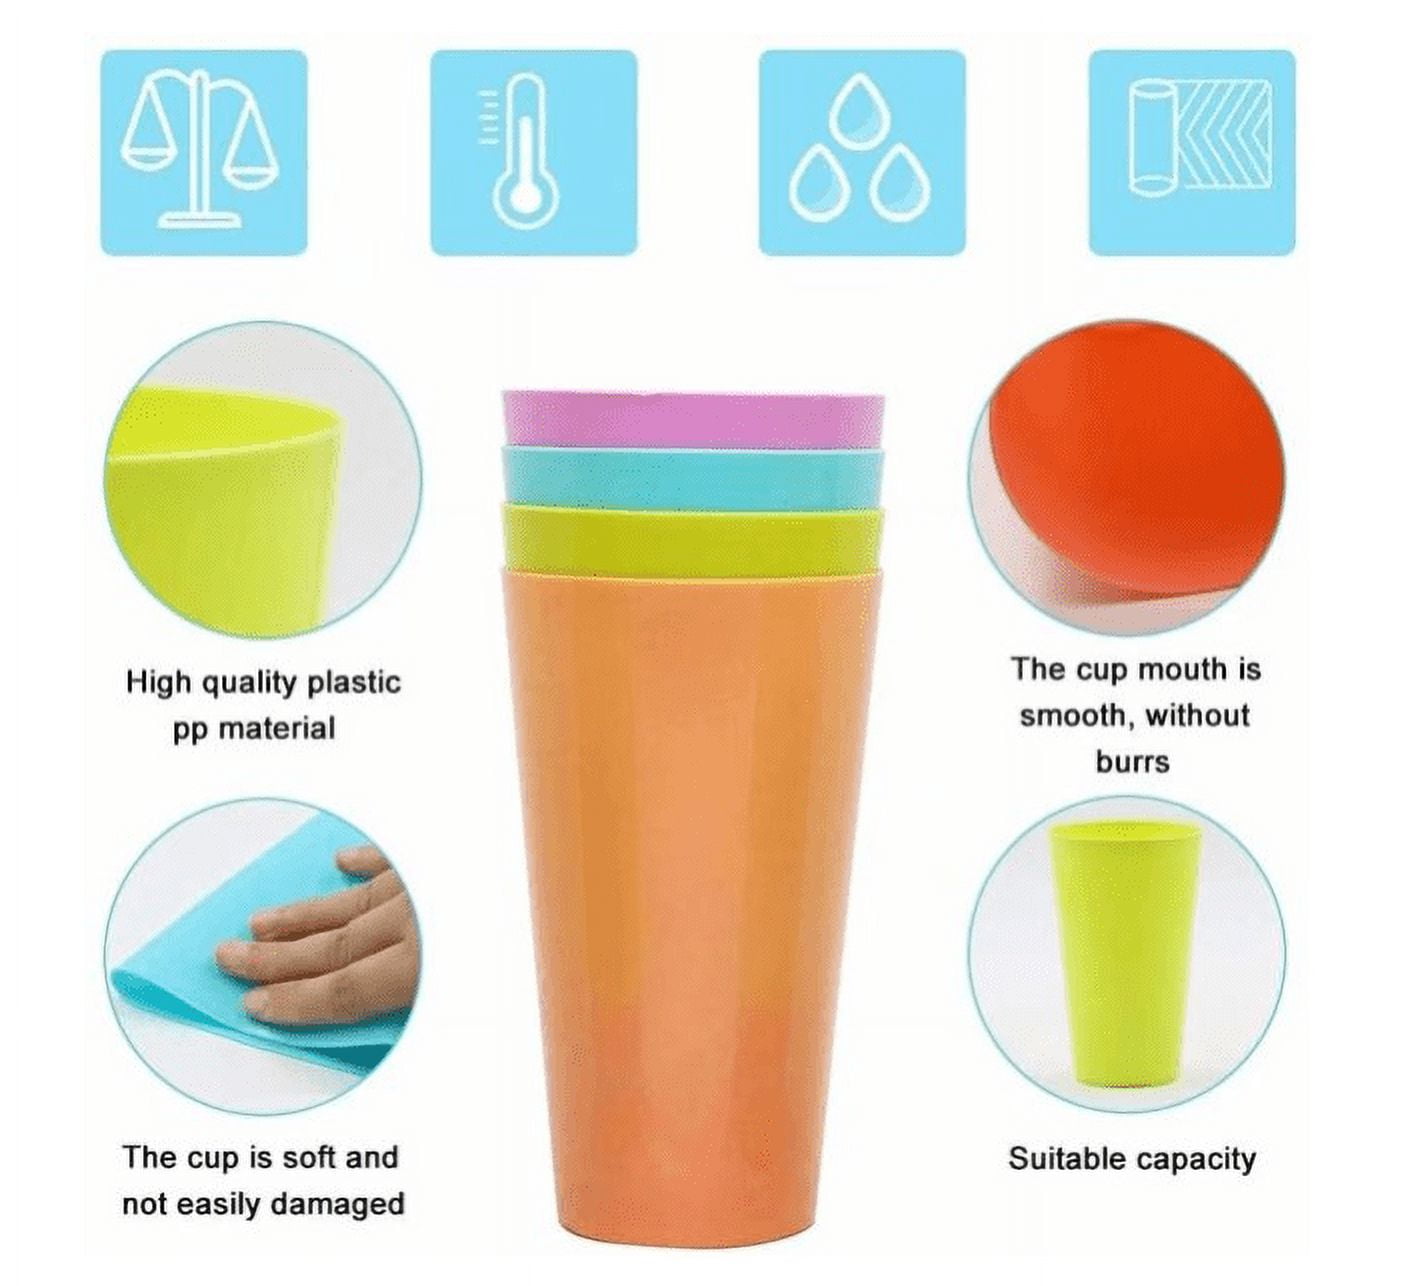 TORUBIA Coloured Plastic Cups (12 Pack) - 330ml/11 fl oz - Reusable  Drinking Tumblers in 4 Colours - Hard Plastic Drinkware for Parties,  Camping, BBQs, Picnics & Beach - Dishwasher Safe & BPA Free 